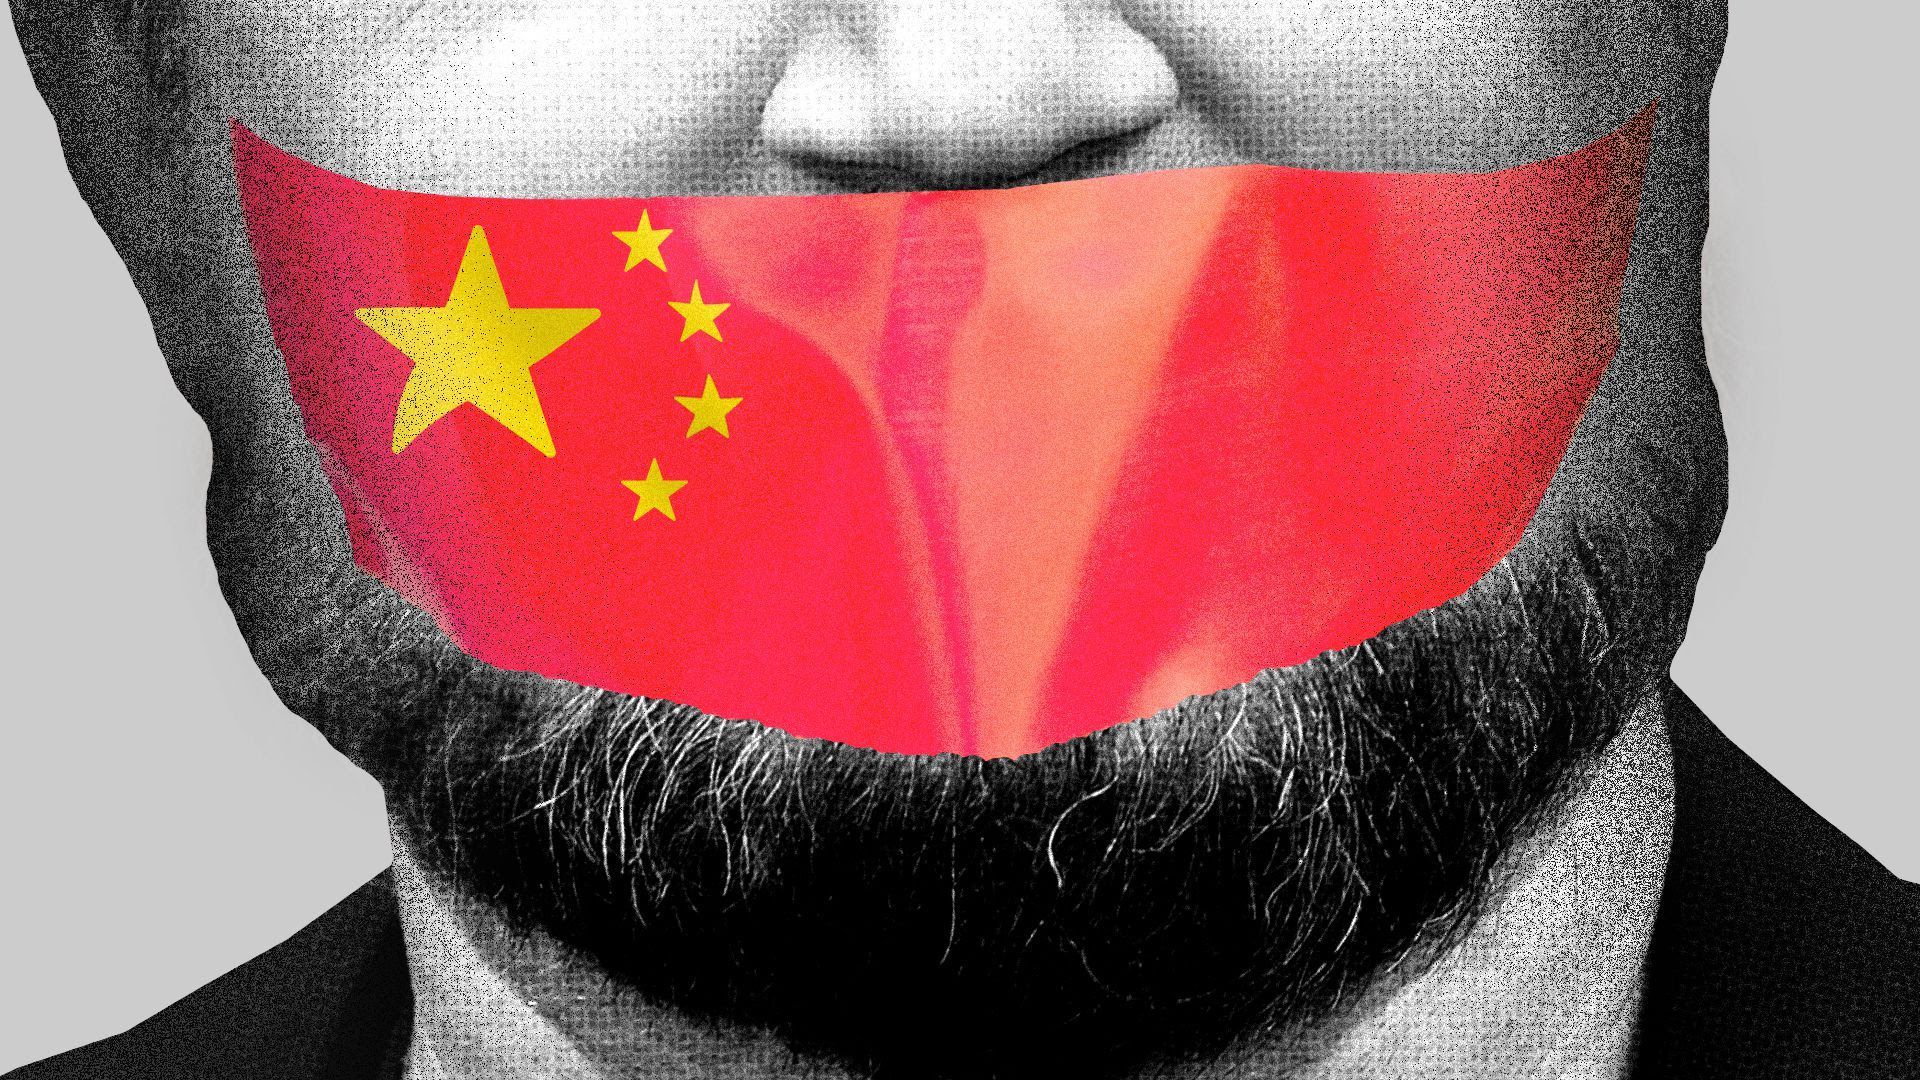 Illustration of a man with duct tape on his mouth with the Chinese flag printed on it